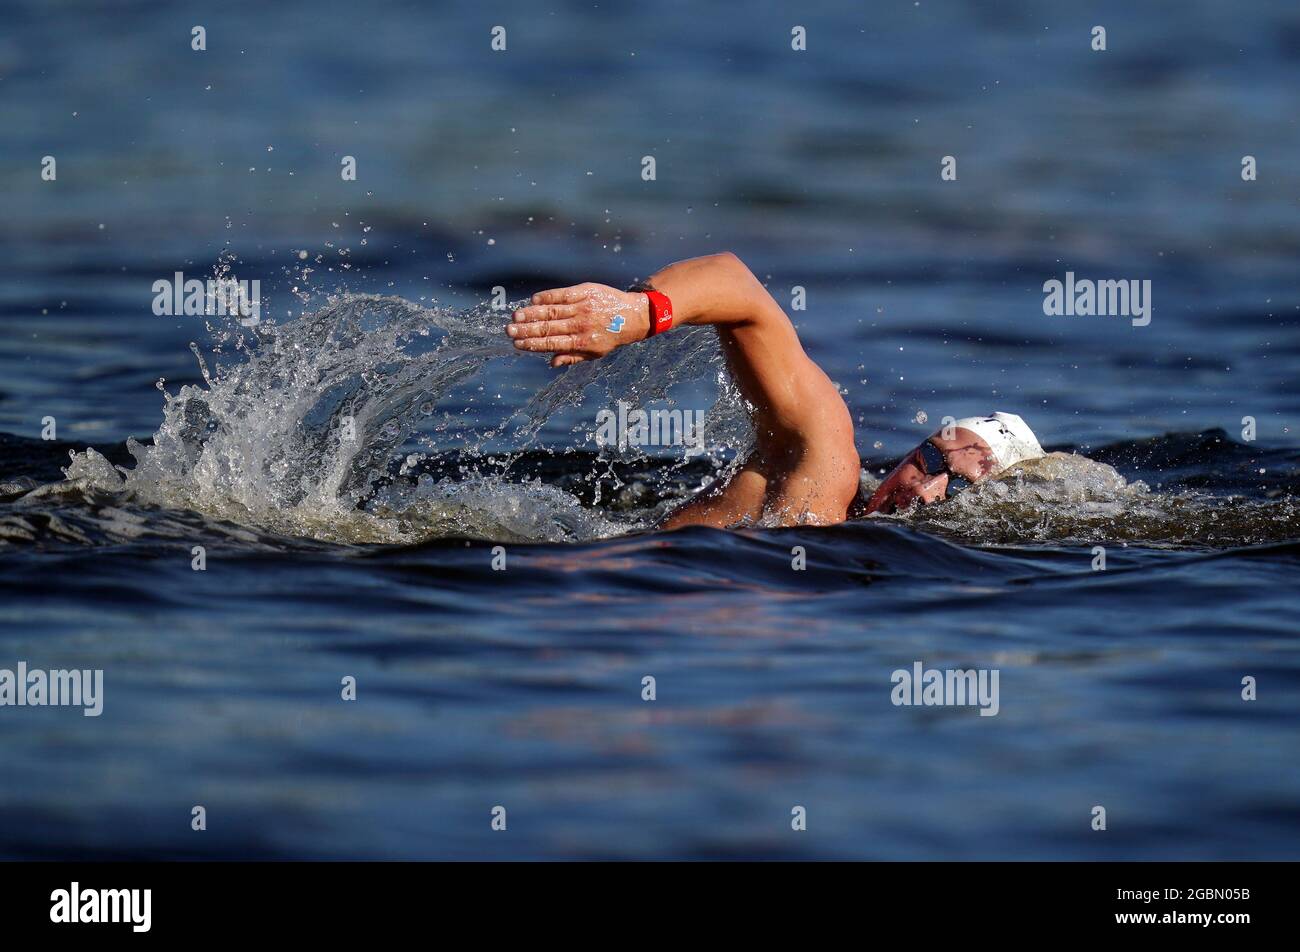 Jo da hjørne linned USA's Jordan Wilimovsky during the Men's 10km Marathon Swimming race at  Odaiba Marine Park on the thirteenth day of the Tokyo 2020 Olympic Games in  Japan. Picture date: Thursday August 5, 2021